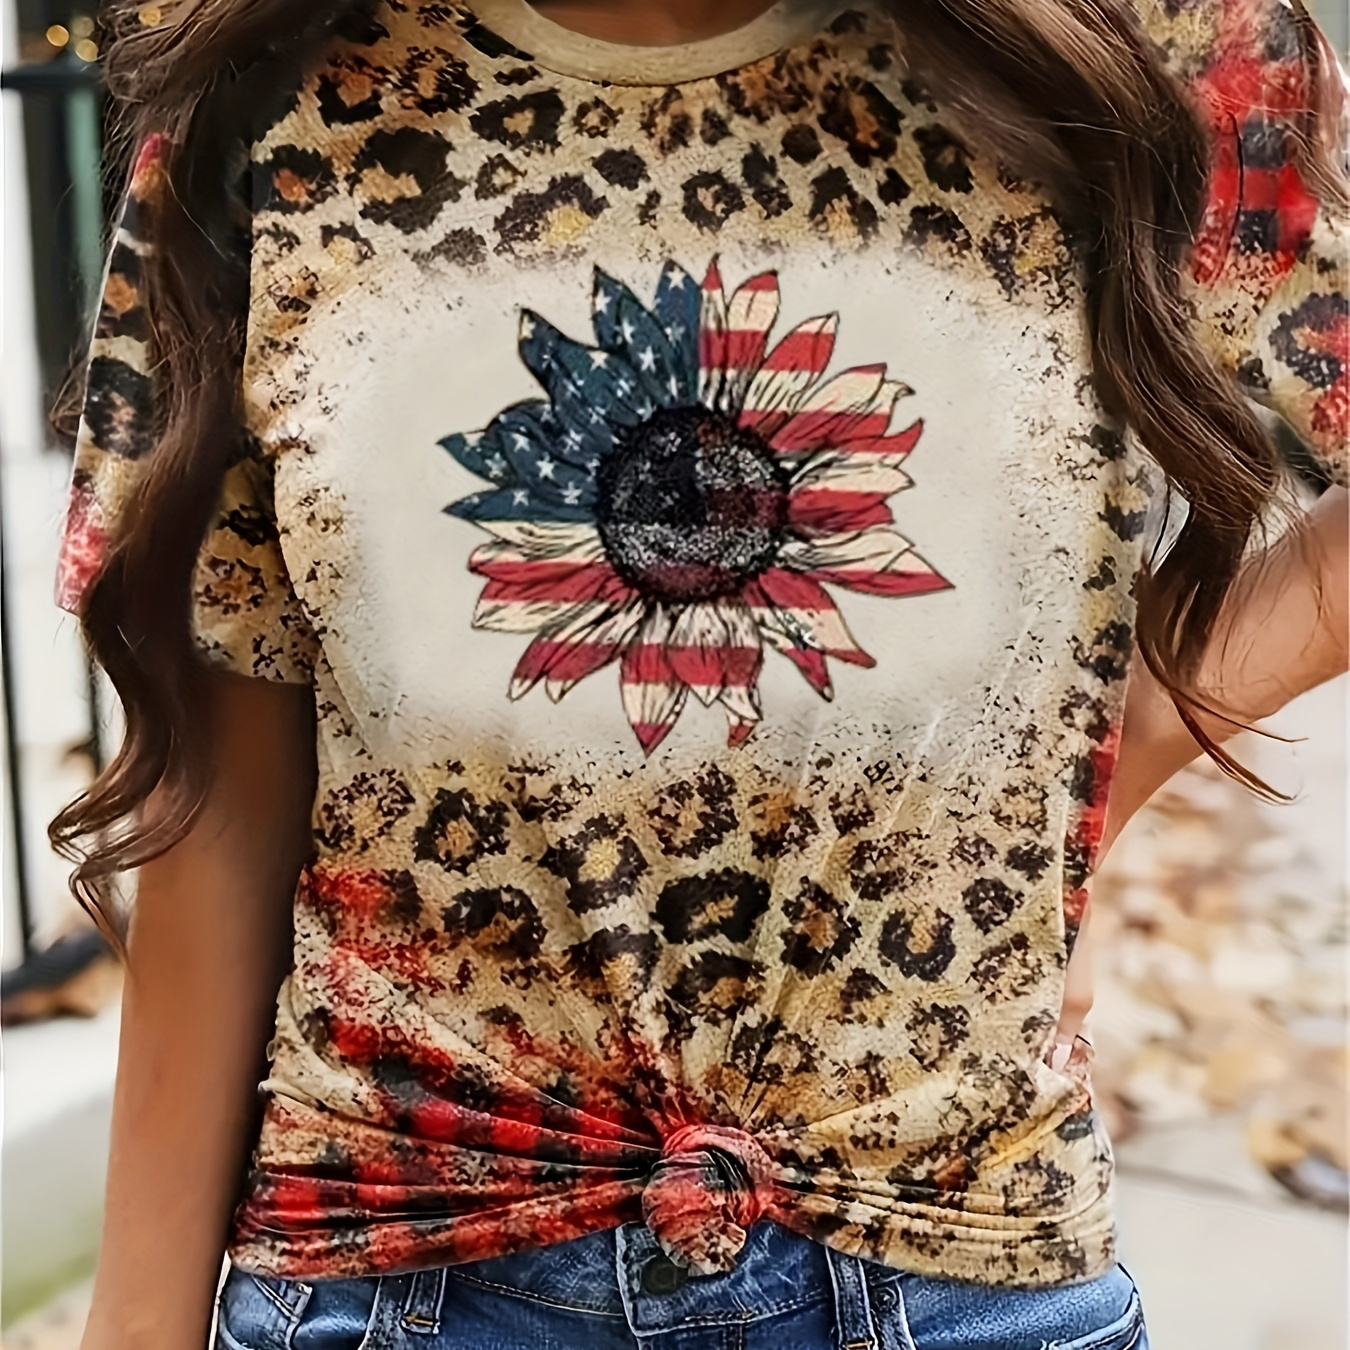 

Leopard & Flag Print T-shirt, Crew Neck Short Sleeve T-shirt, Casual Every Day Tops, Women's Clothing